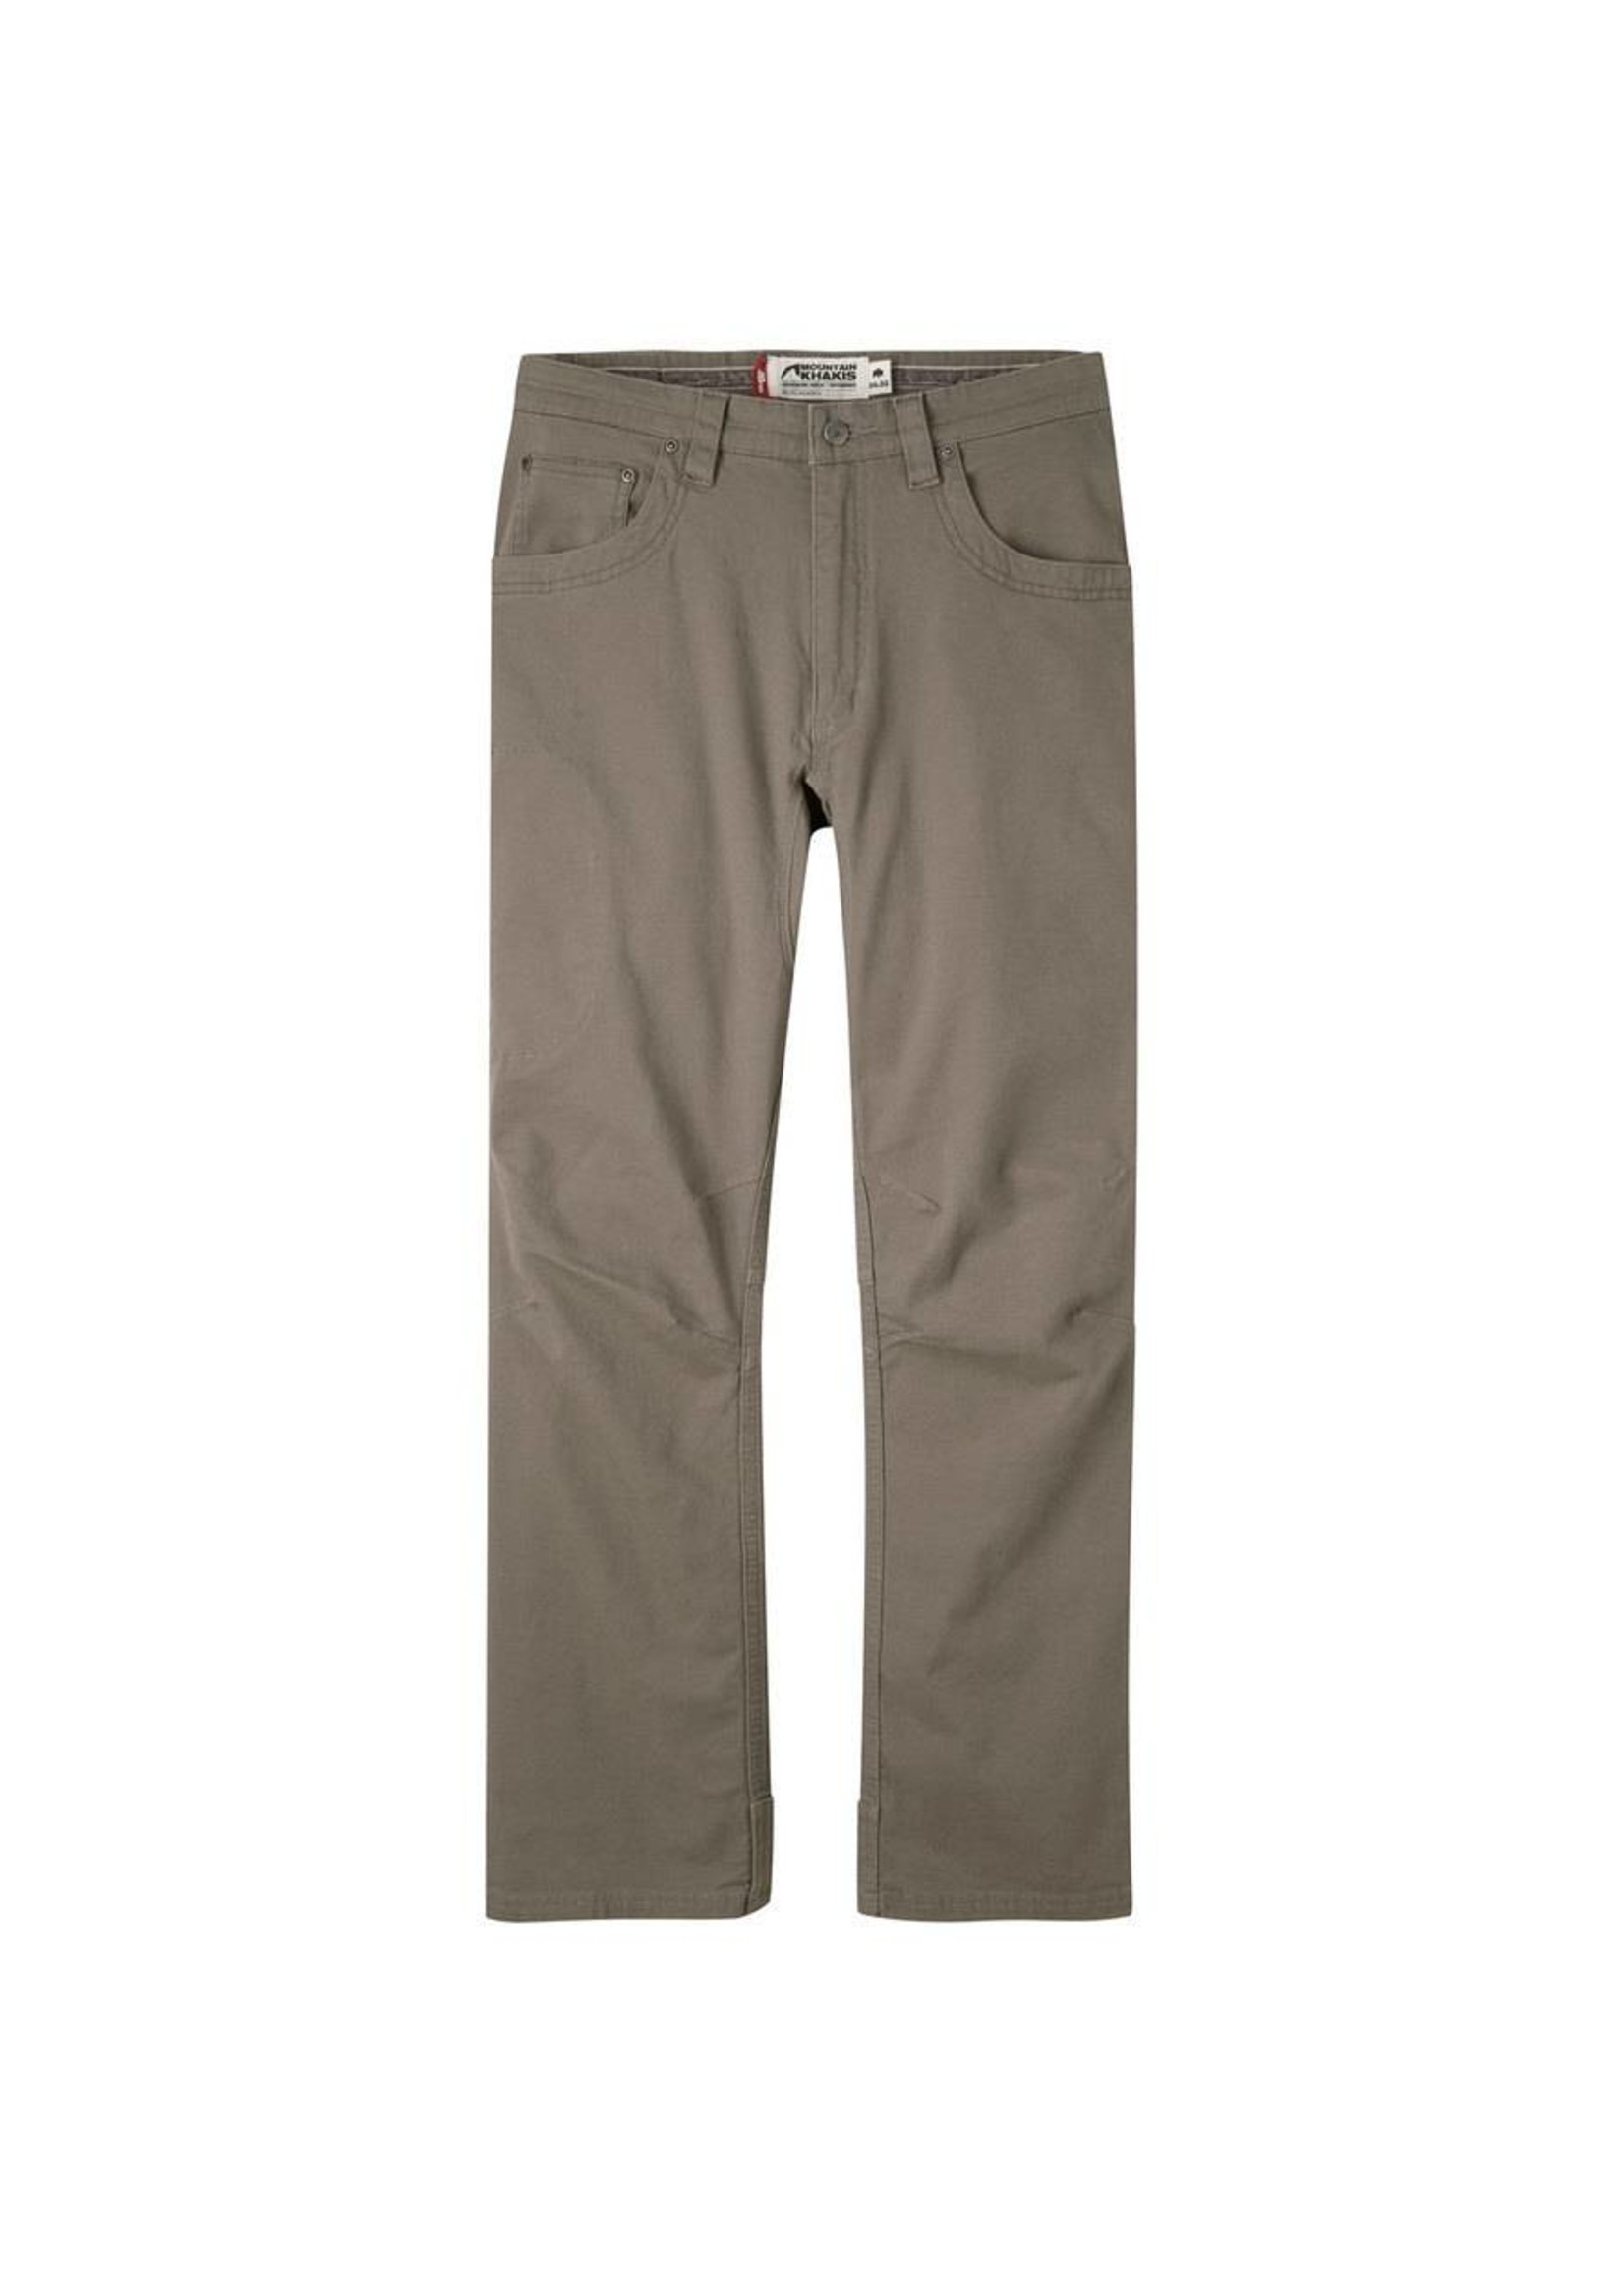 Mountain Khakis Camber 106 Pant Classic Fit